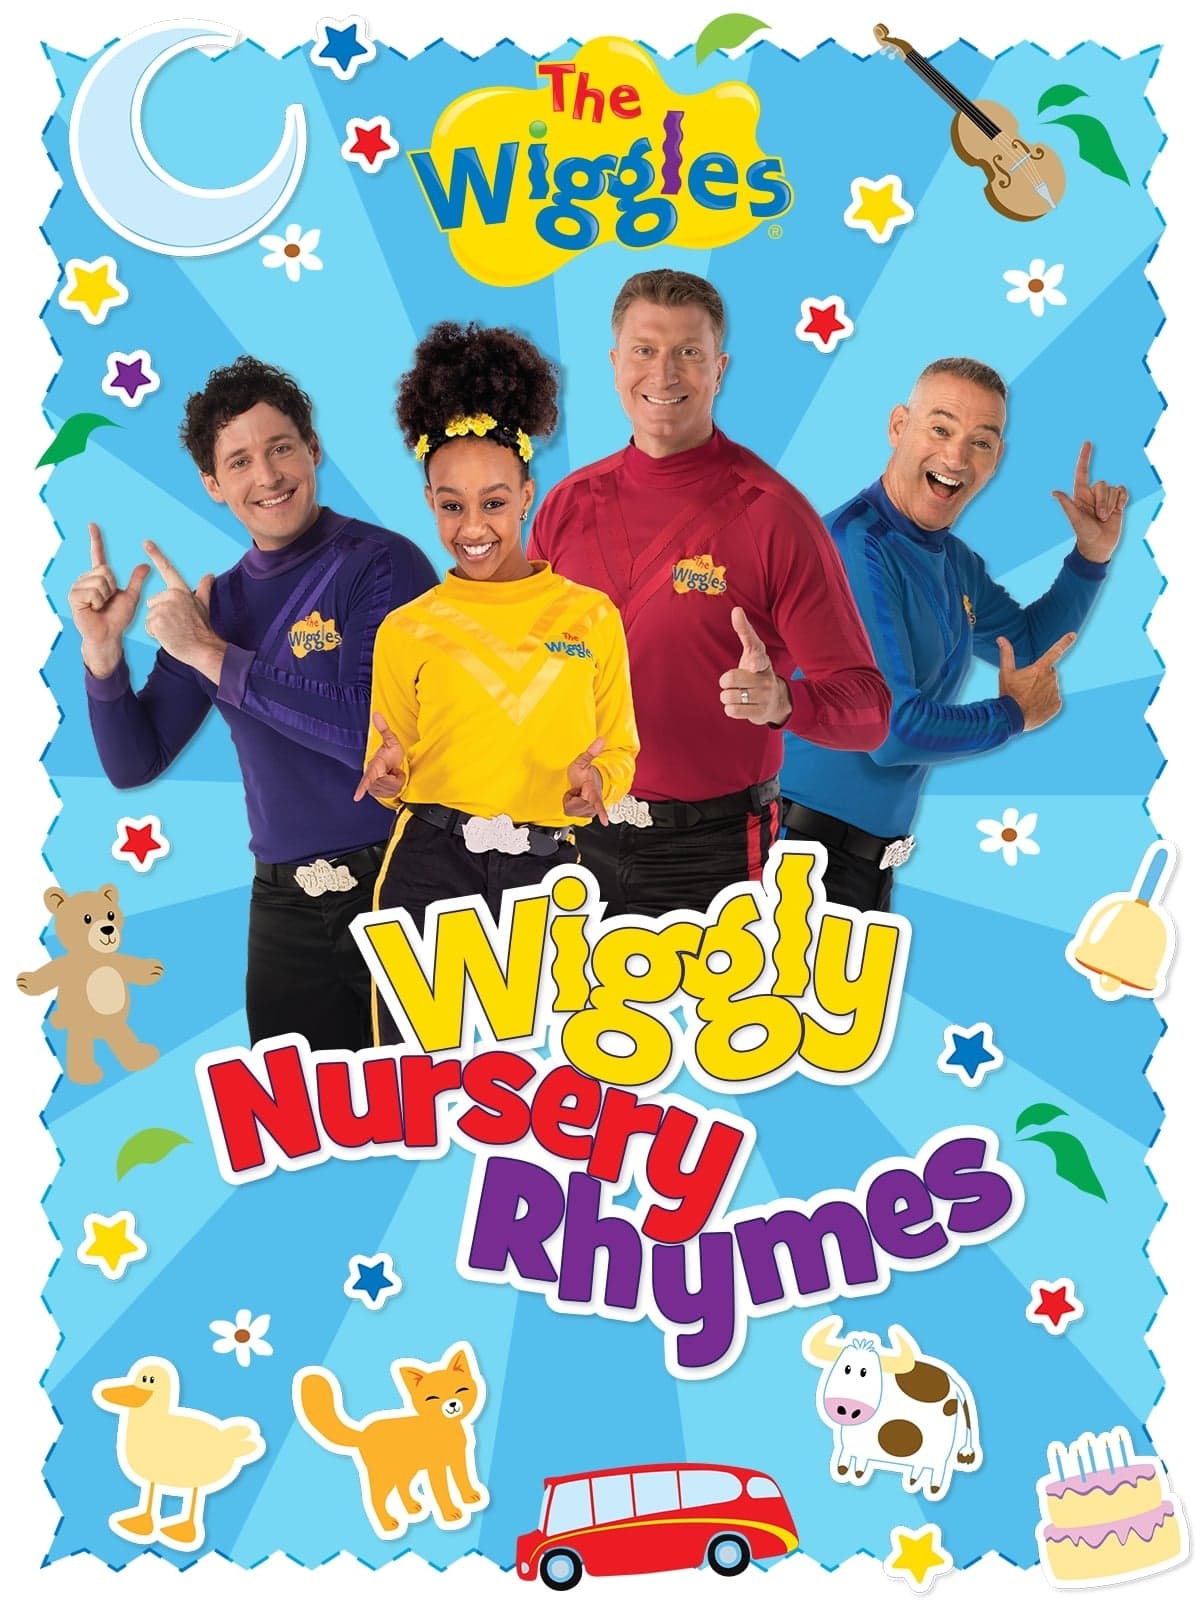 The Wiggles - Wiggly Nursery Rhymes